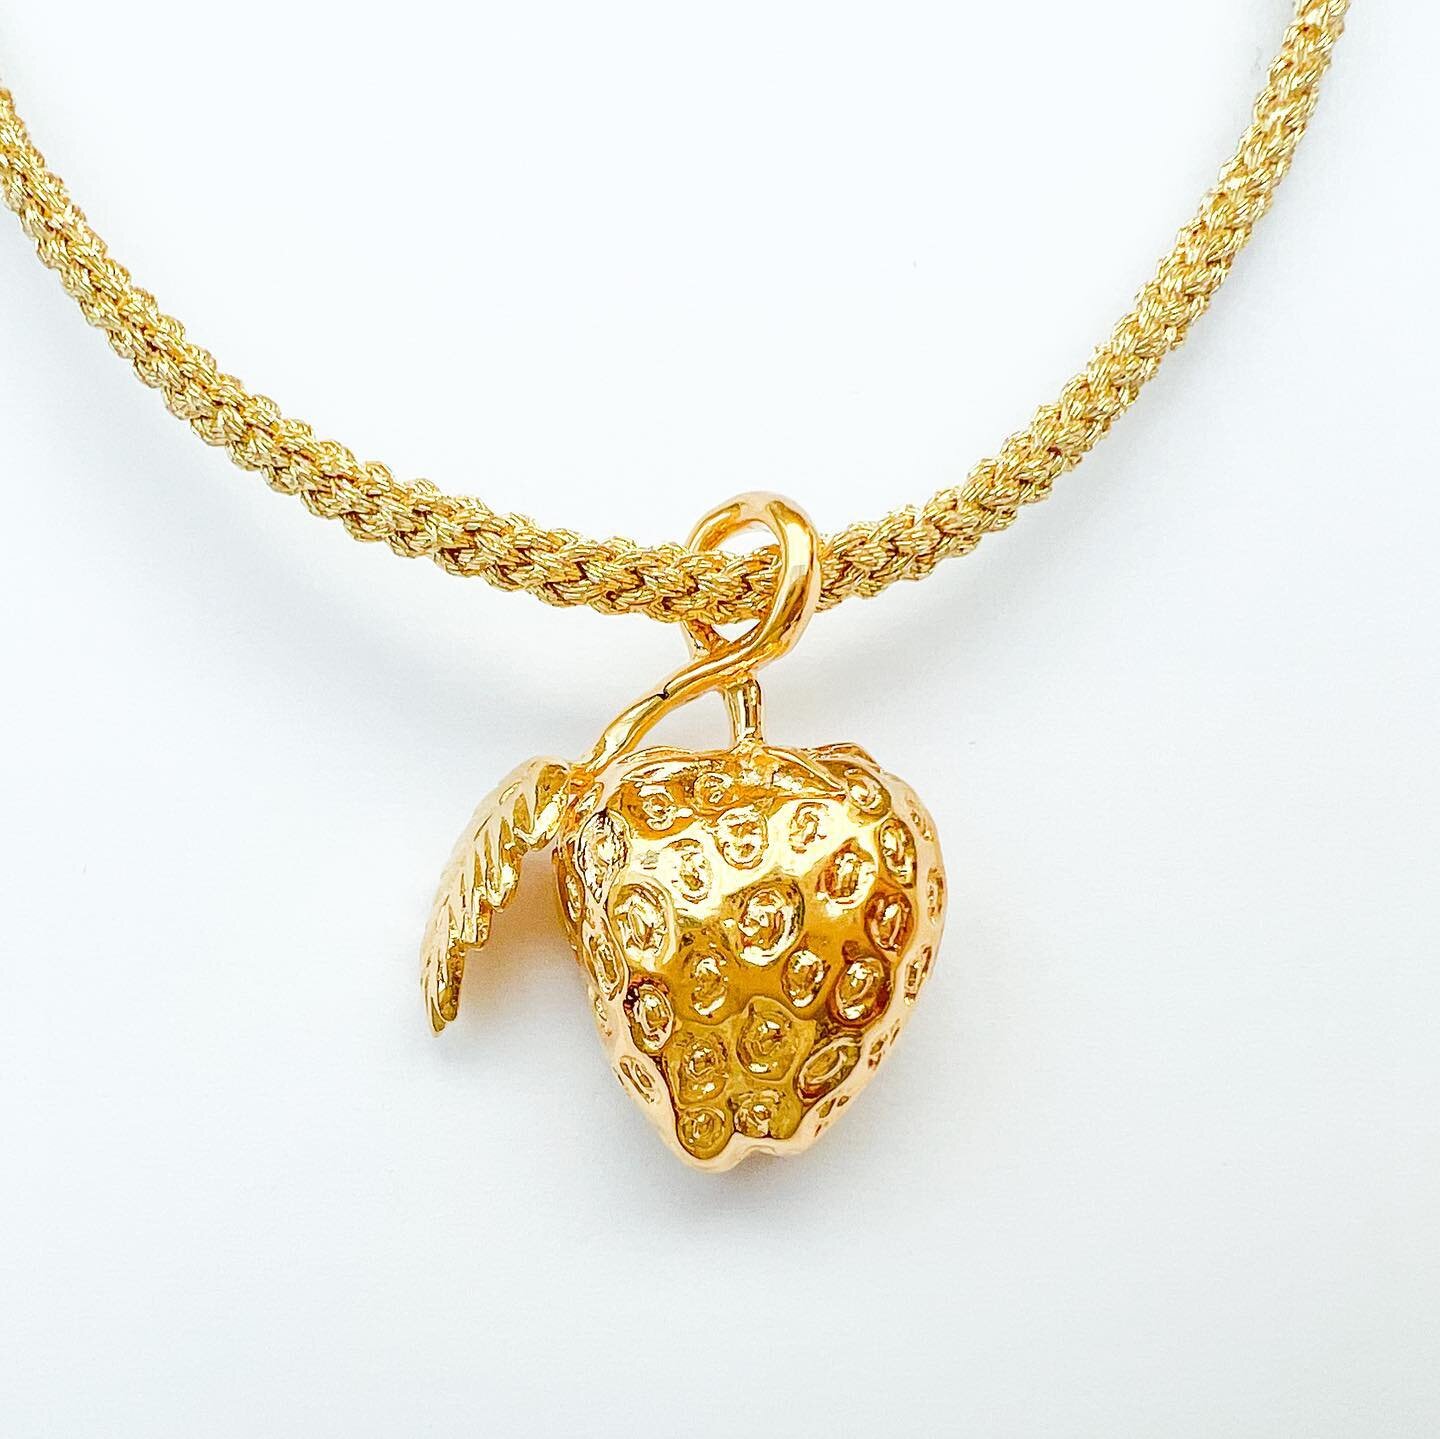 Strawberry necklace in gold plated or 9 carat gold with handwoven gold thread. Originally hand-carved in wax (swipe to see wax work), you can see the trace of my hand in every jewel. Order yours now at www.josephinedestael.com #jewellery #lostwaxcast